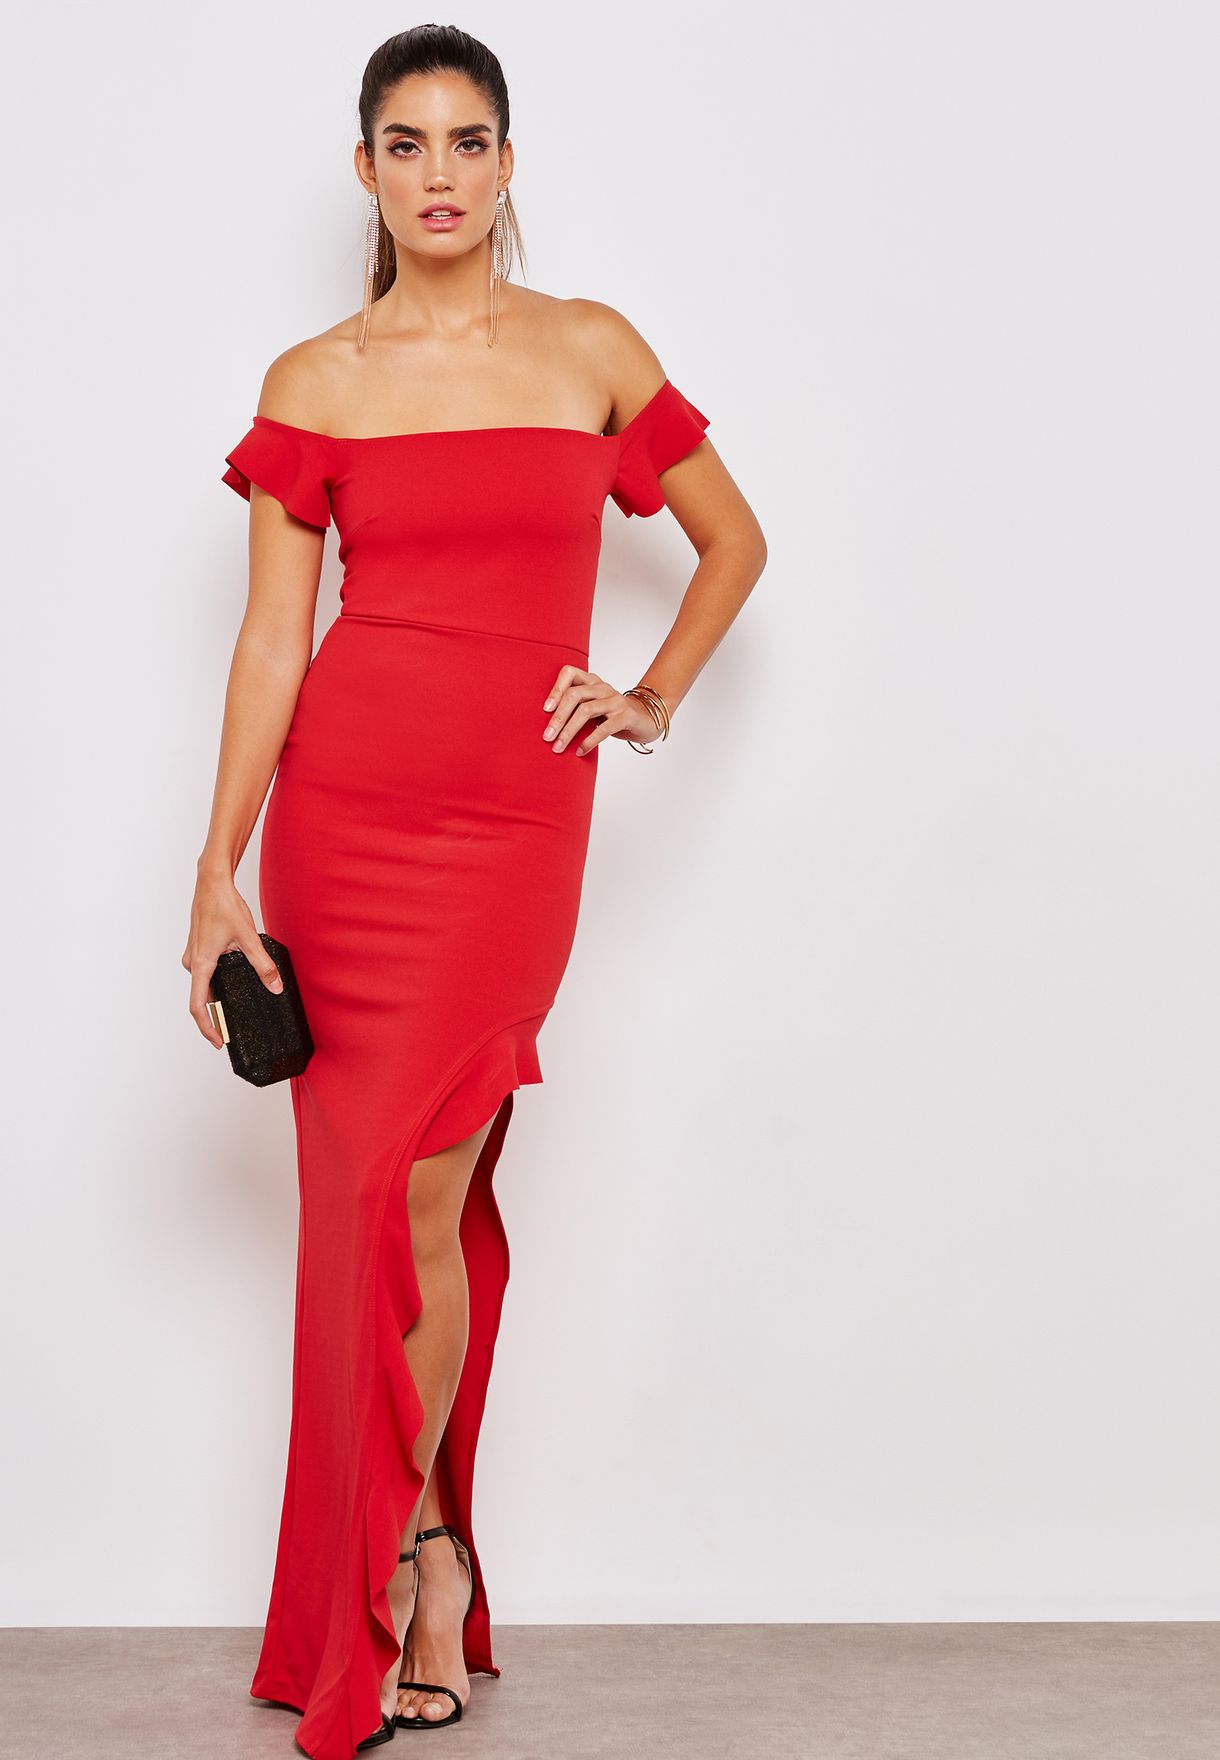 Buy > missguided red long dress > in stock